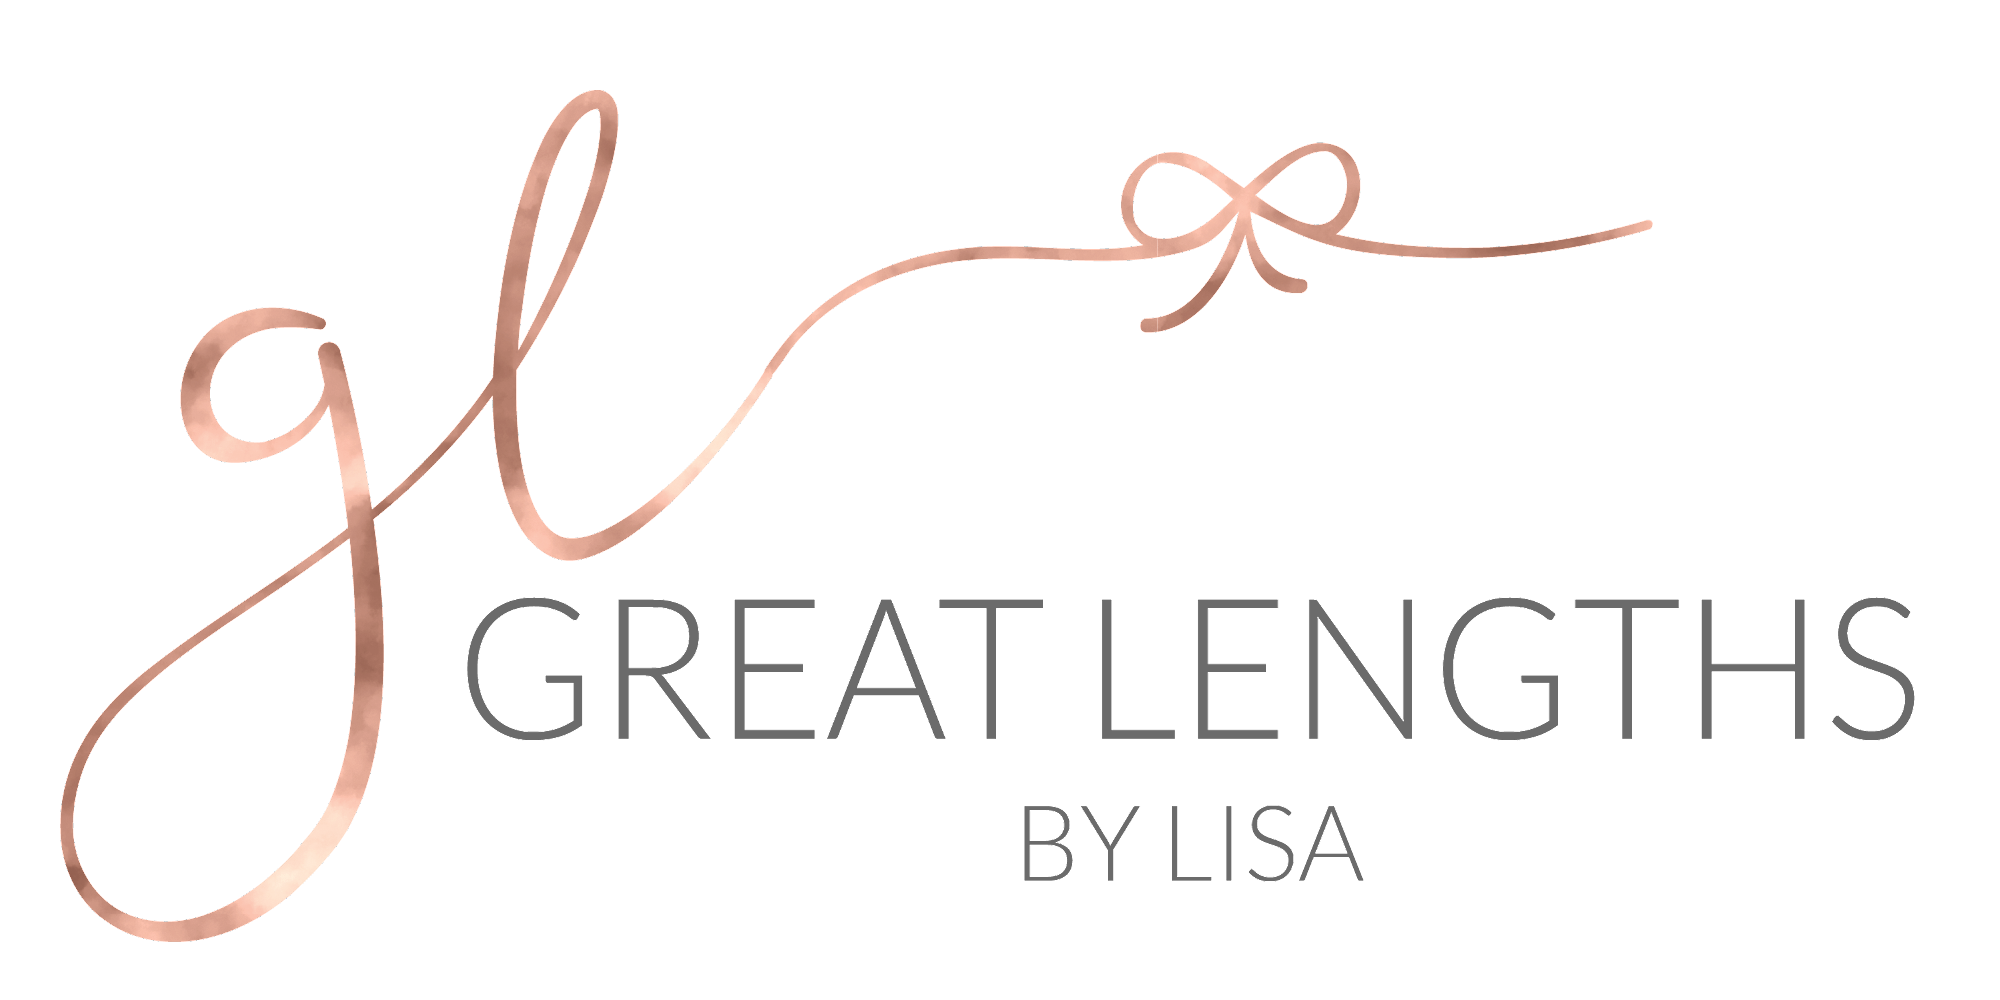 Great lengths by Lisa 647 N Main St, North Webster Indiana 46555